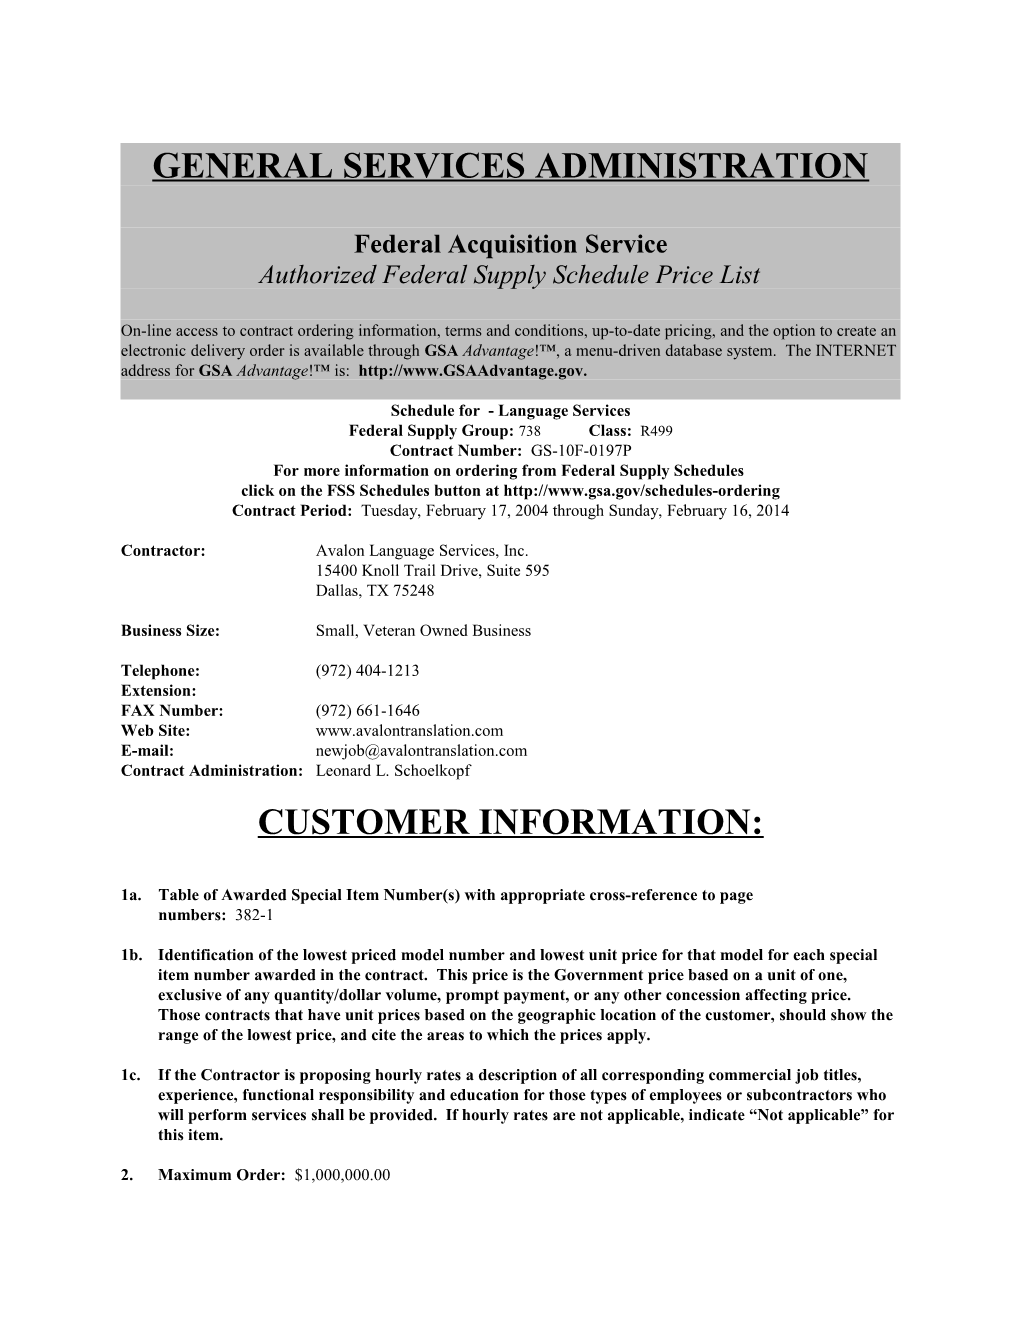 General Services Administration s24